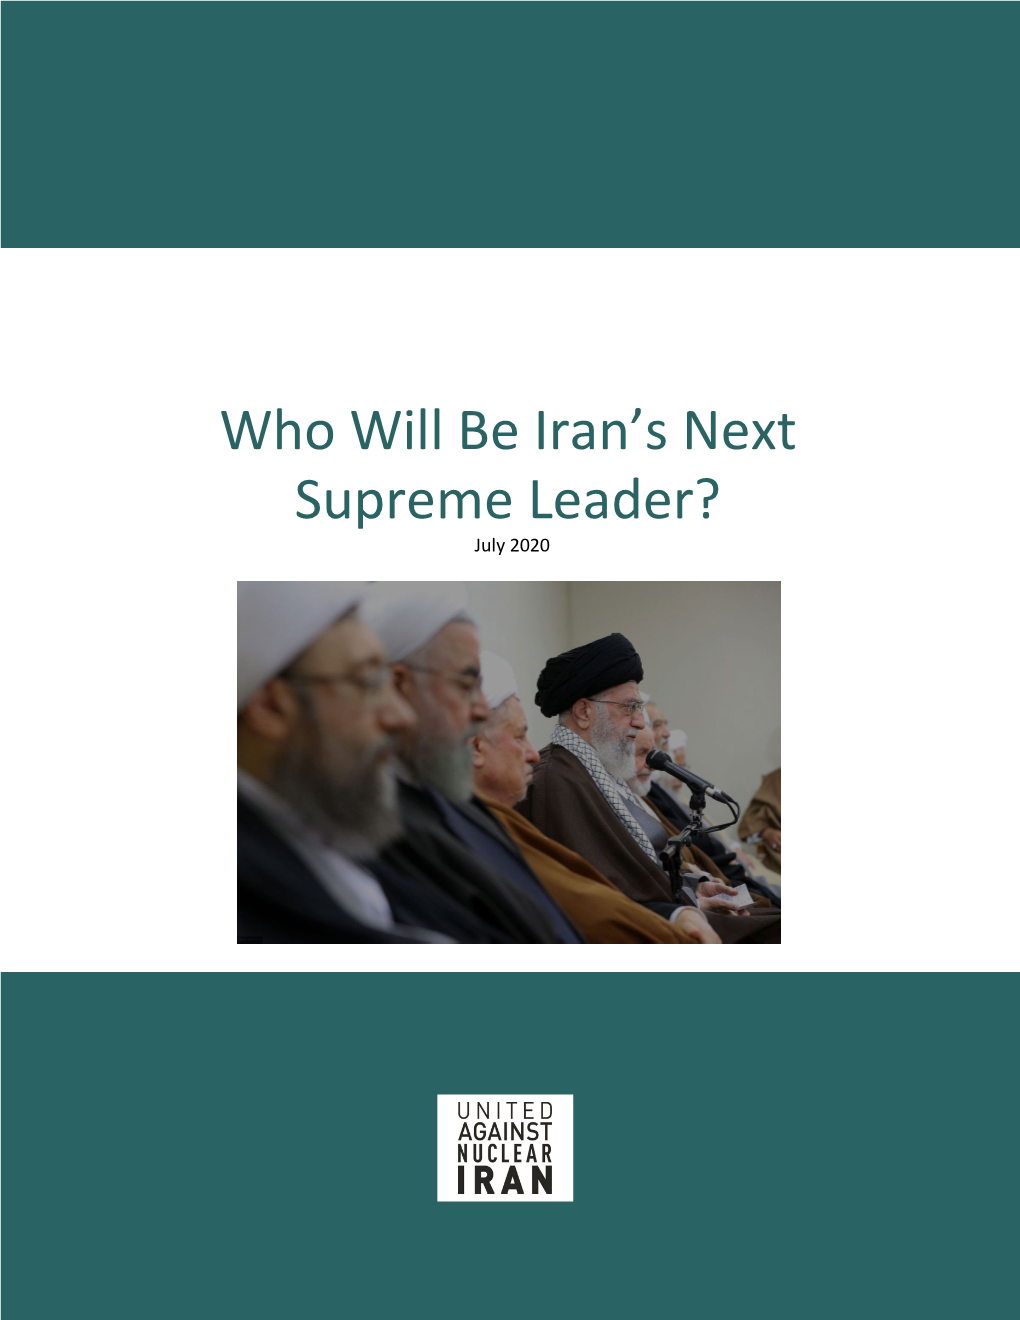 Who Will Be Iran's Next Supreme Leader?